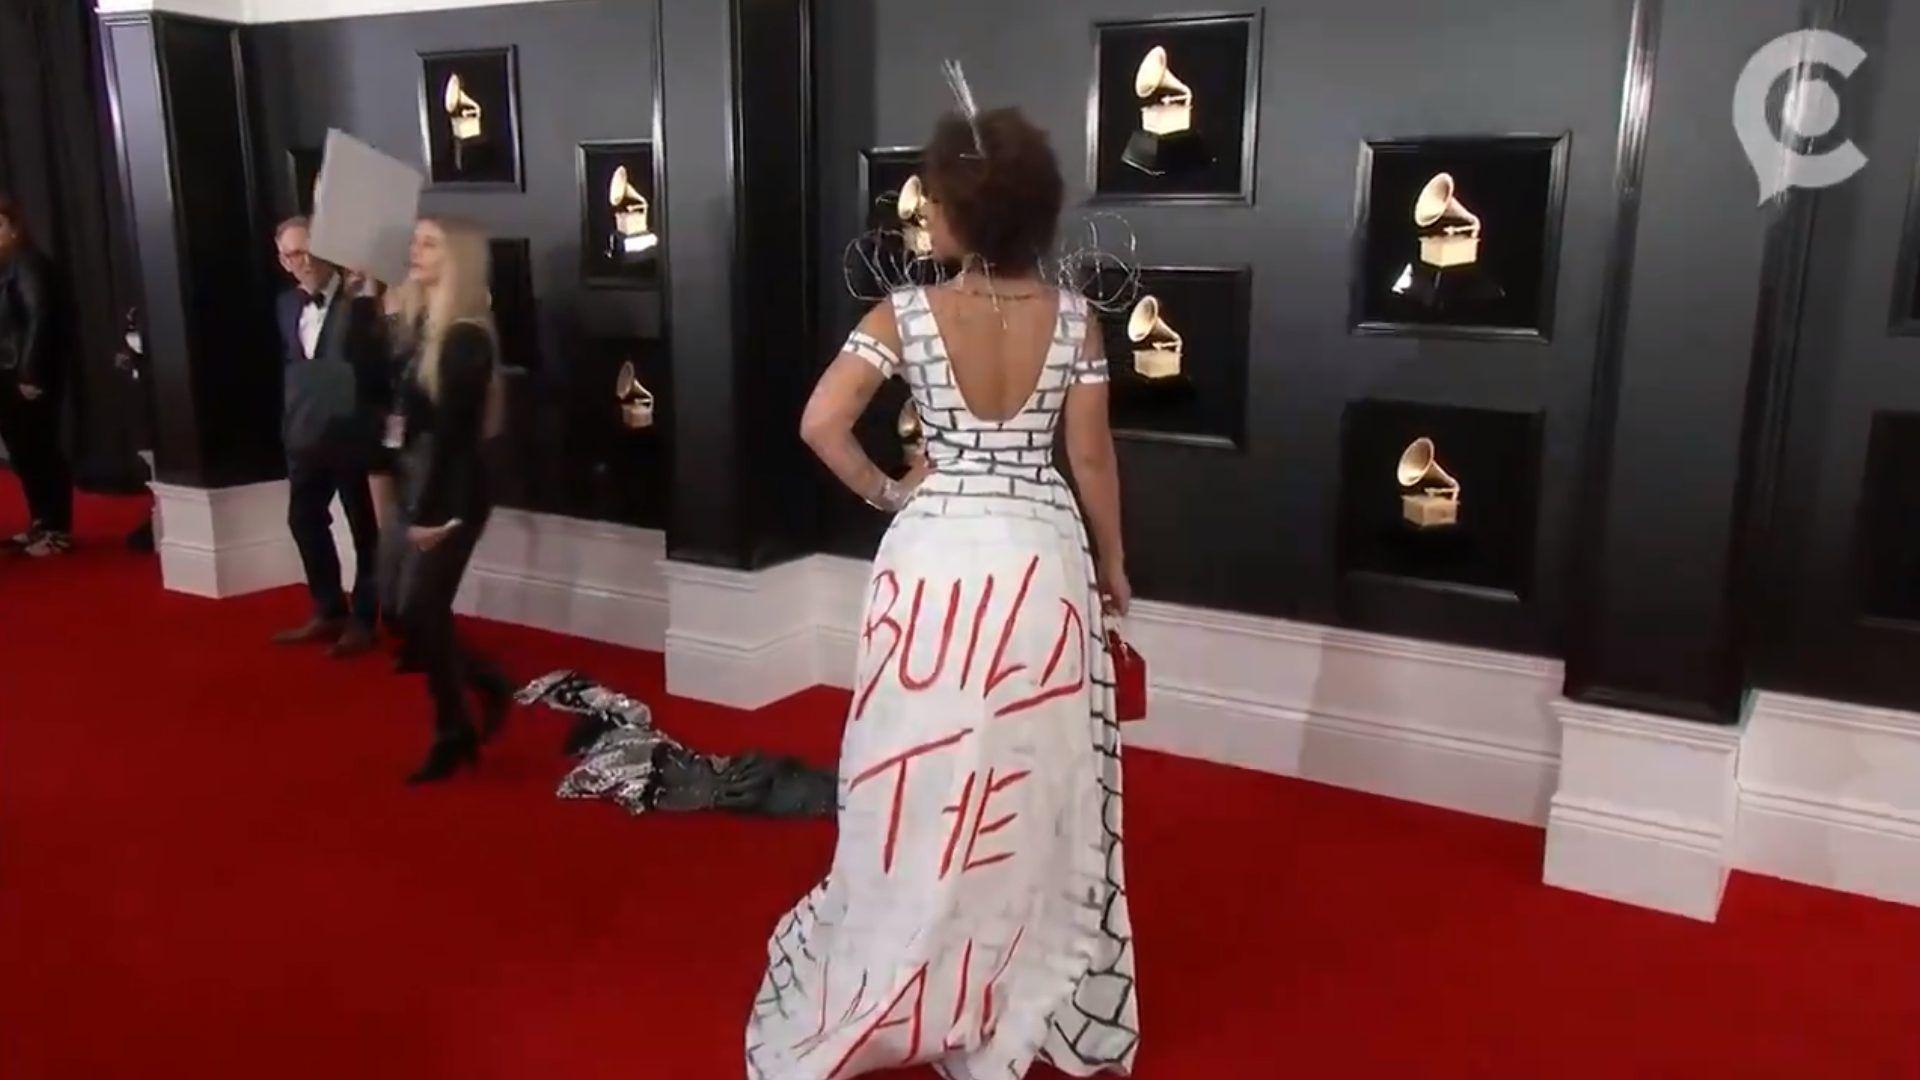 WATCH! Joy Villa stuns in 'Build The Wall' dress at the Grammys